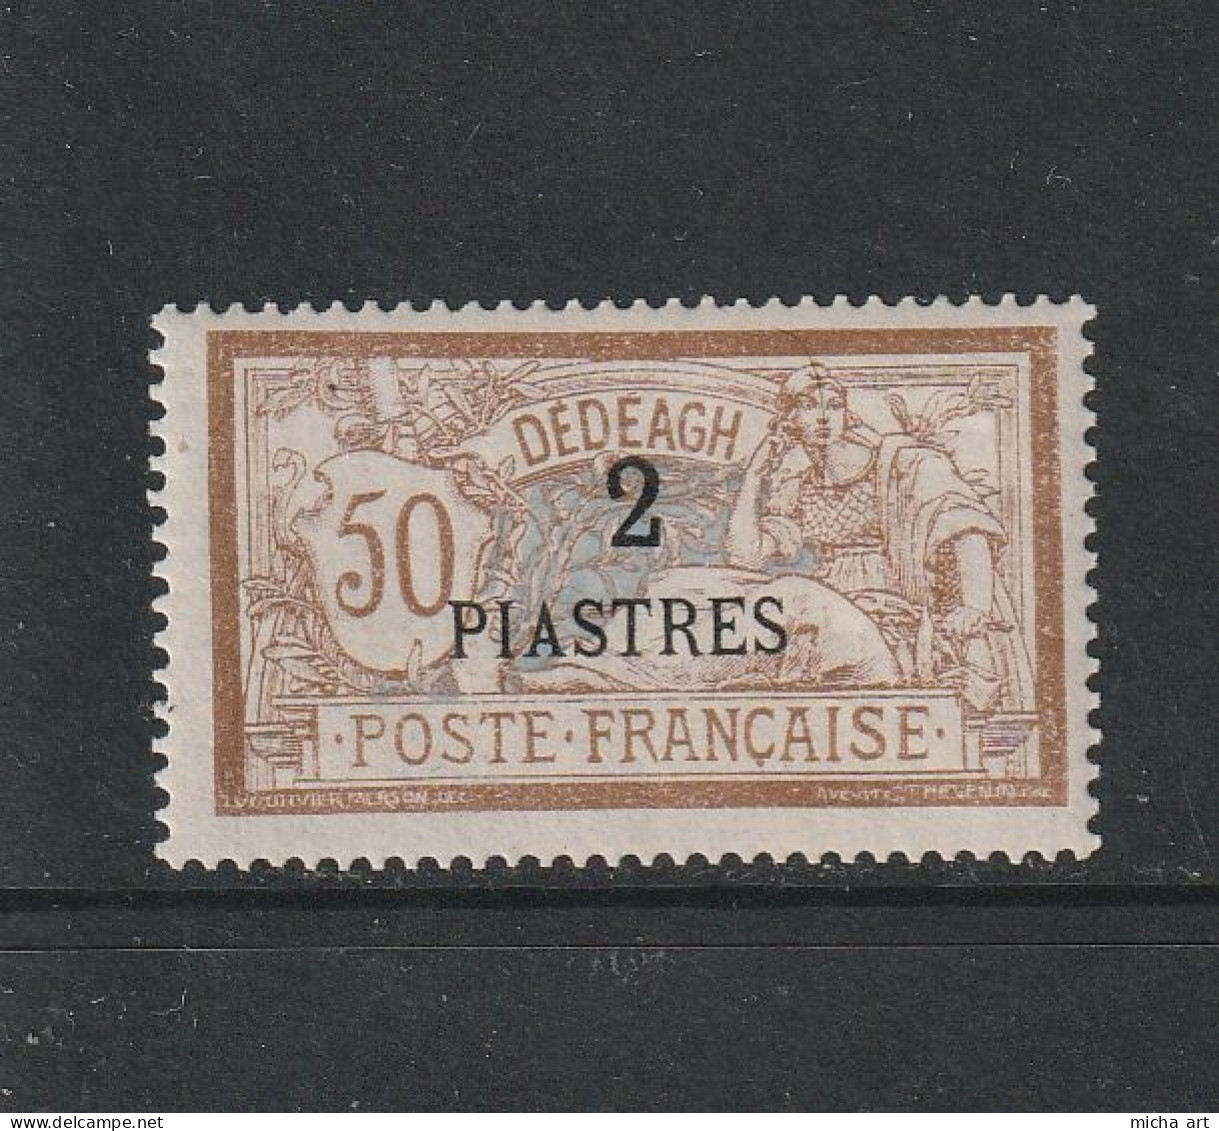 Greece French Post Office 1902 - 1913 Dedeagh Issue 2 Pi / 50 C. MNH W1099 - Nuovi